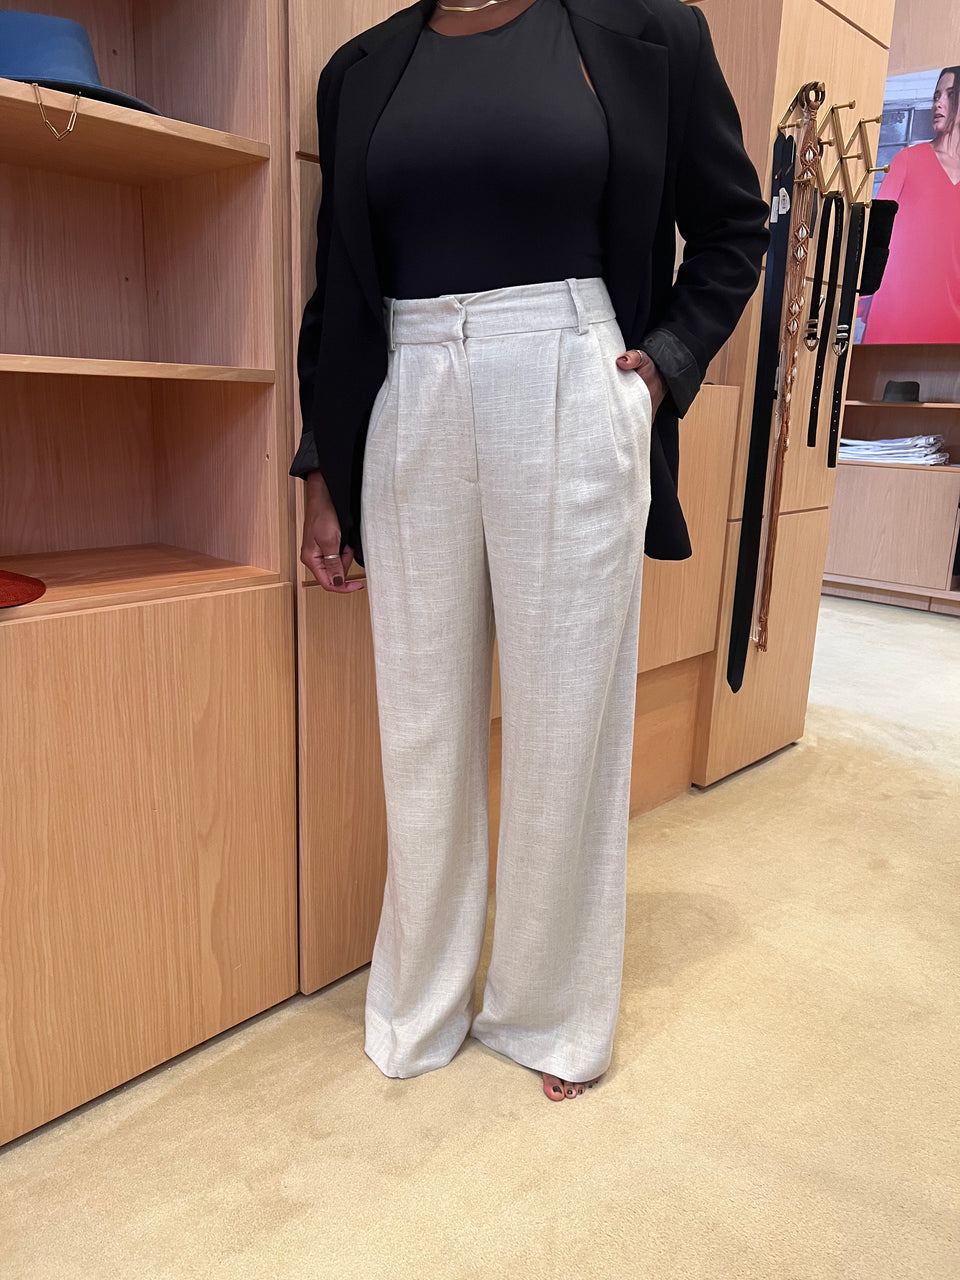 Oscar The Collection- Jessie Trouser